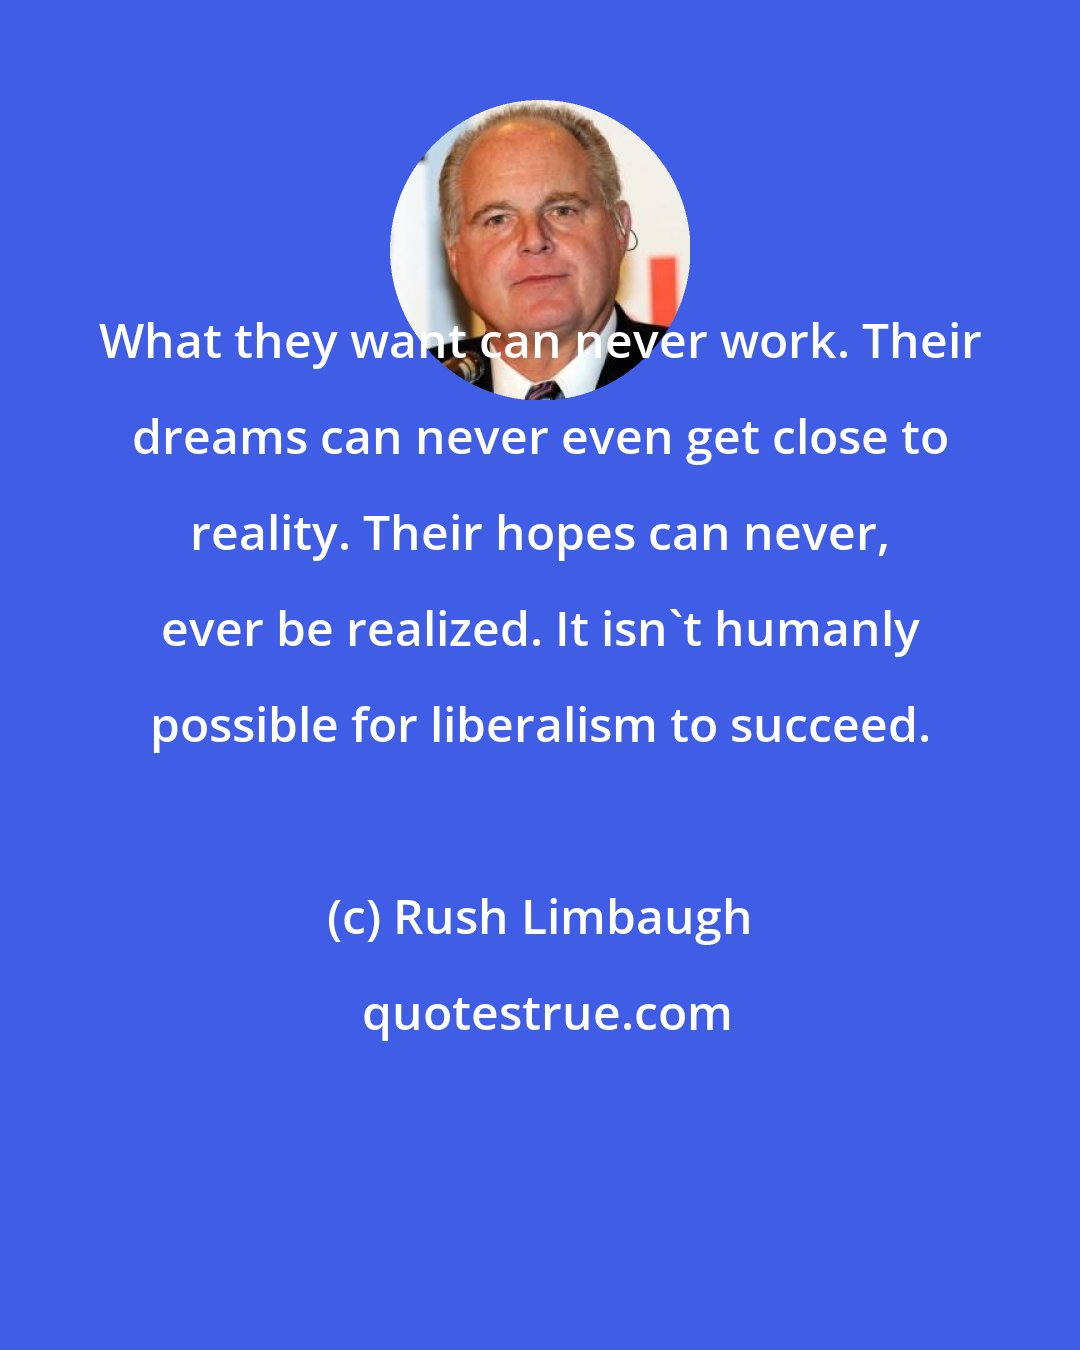 Rush Limbaugh: What they want can never work. Their dreams can never even get close to reality. Their hopes can never, ever be realized. It isn't humanly possible for liberalism to succeed.